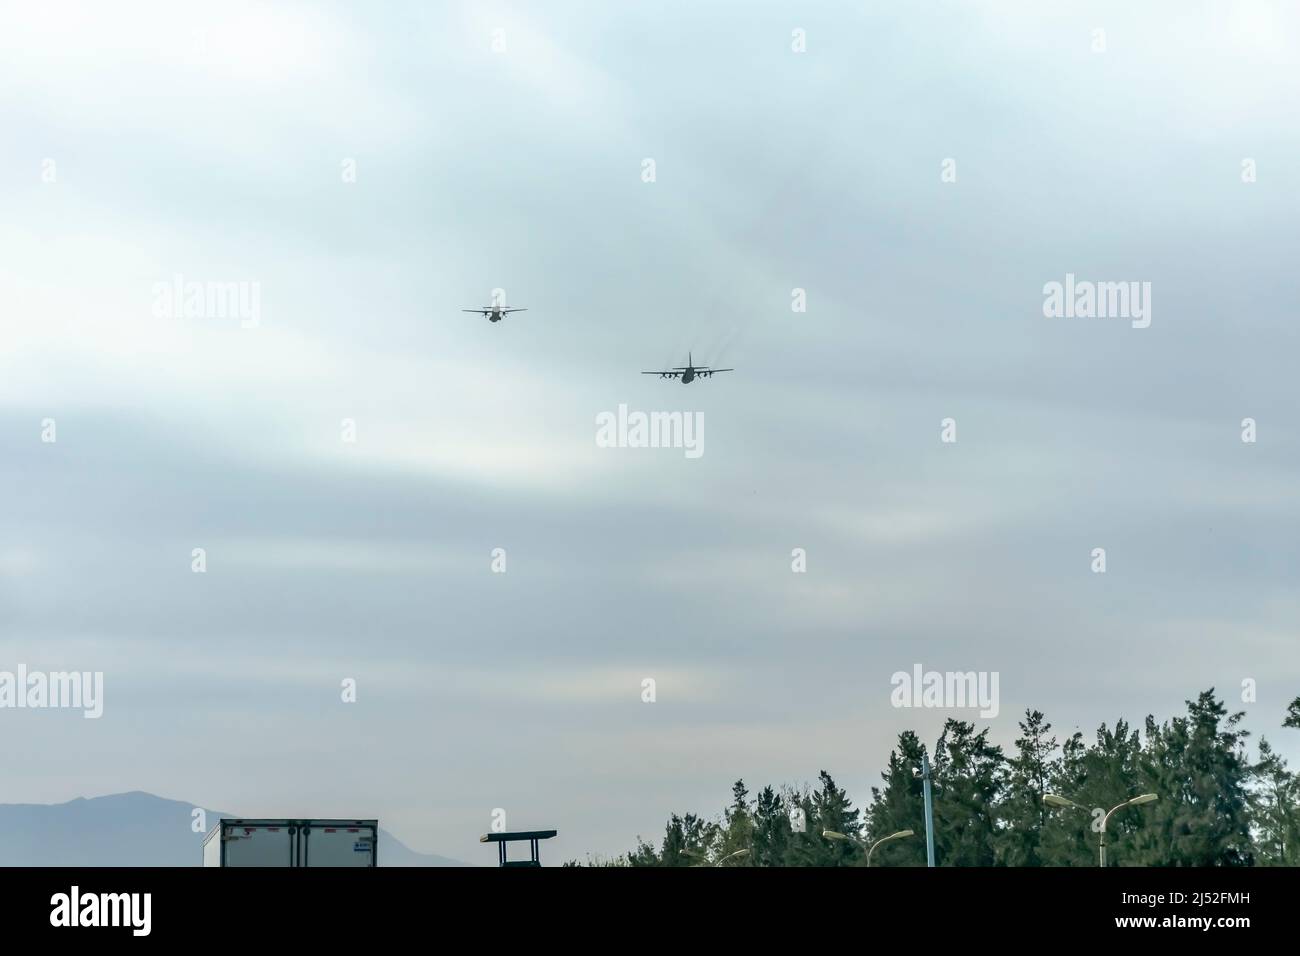 Two airplanes flying above Blida highway on Boufarik military airport. Overcast covered cloudy sky. Par of a truck, trees, and the mountain summit. Stock Photo